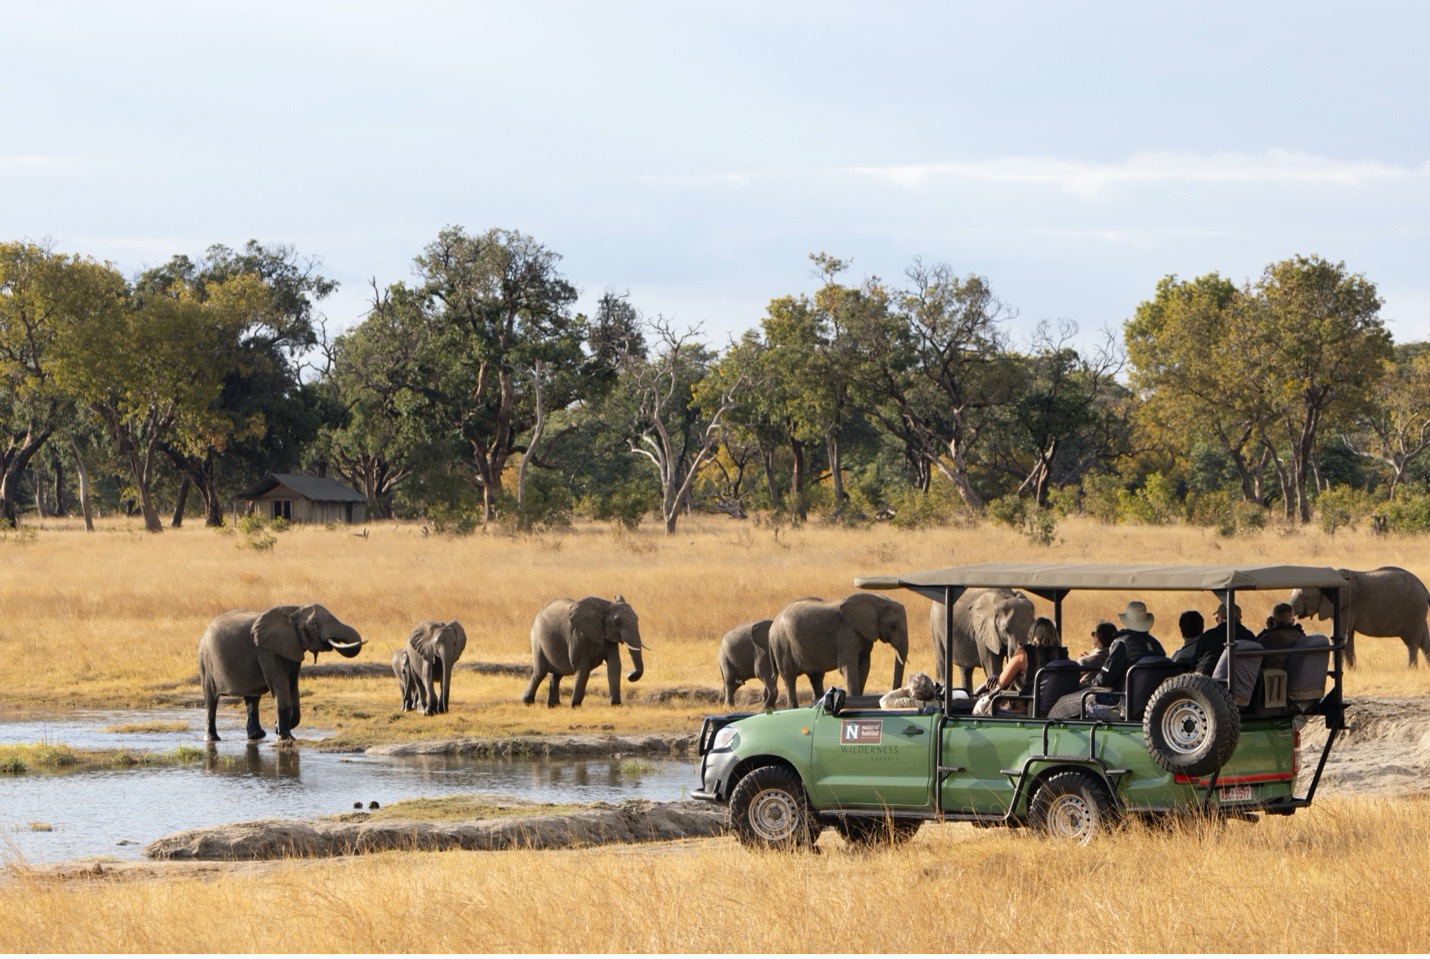 a herd of elephants are seen around a safari truck